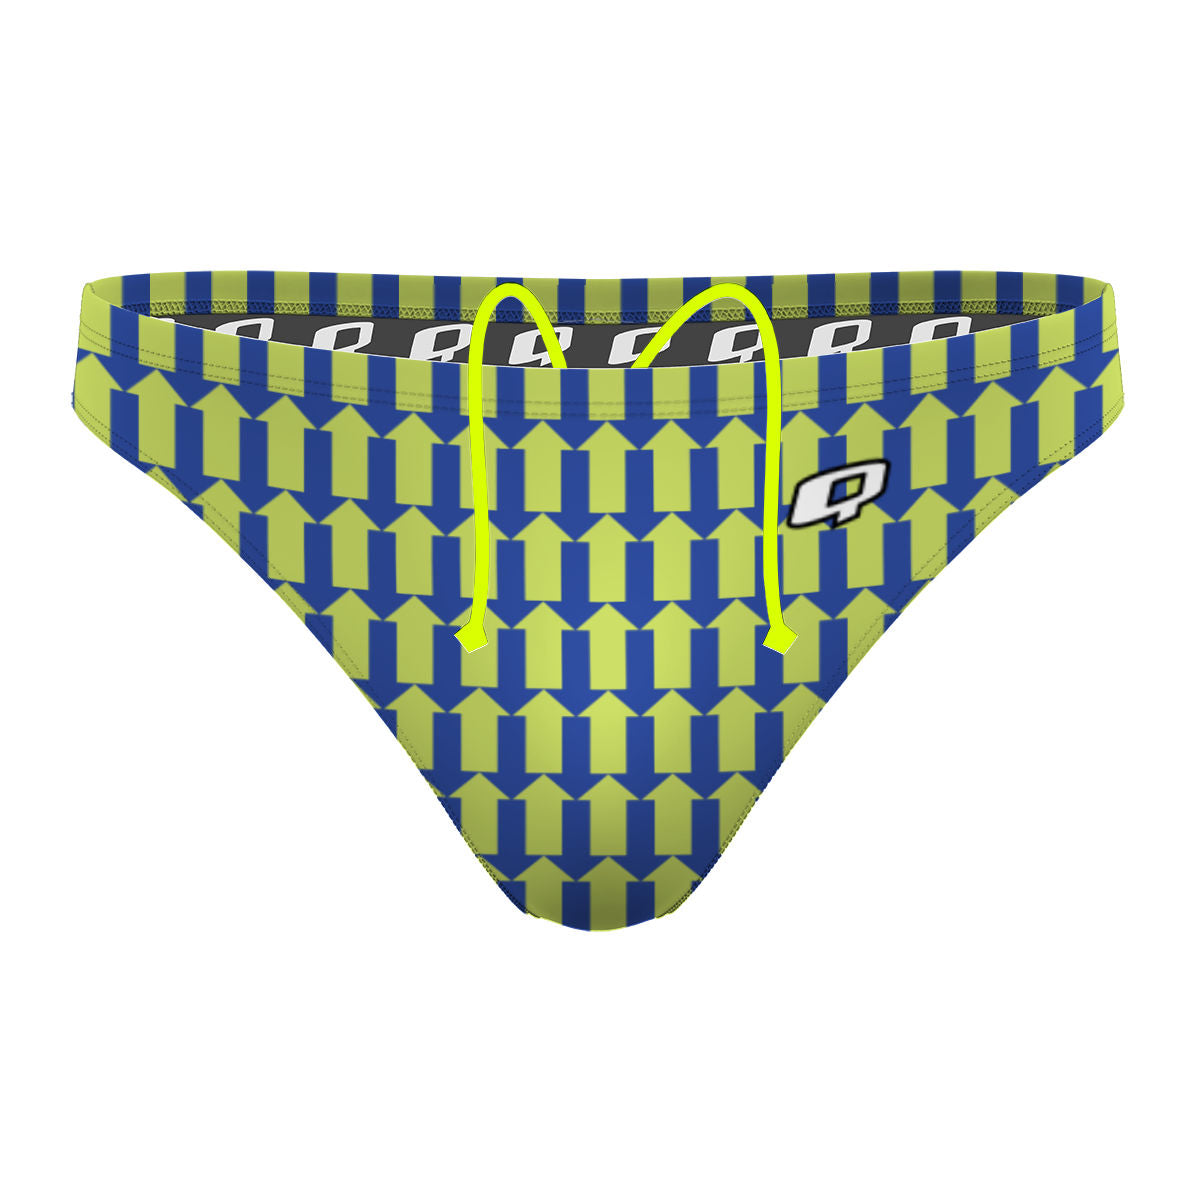 Up Is Down - Waterpolo Brief